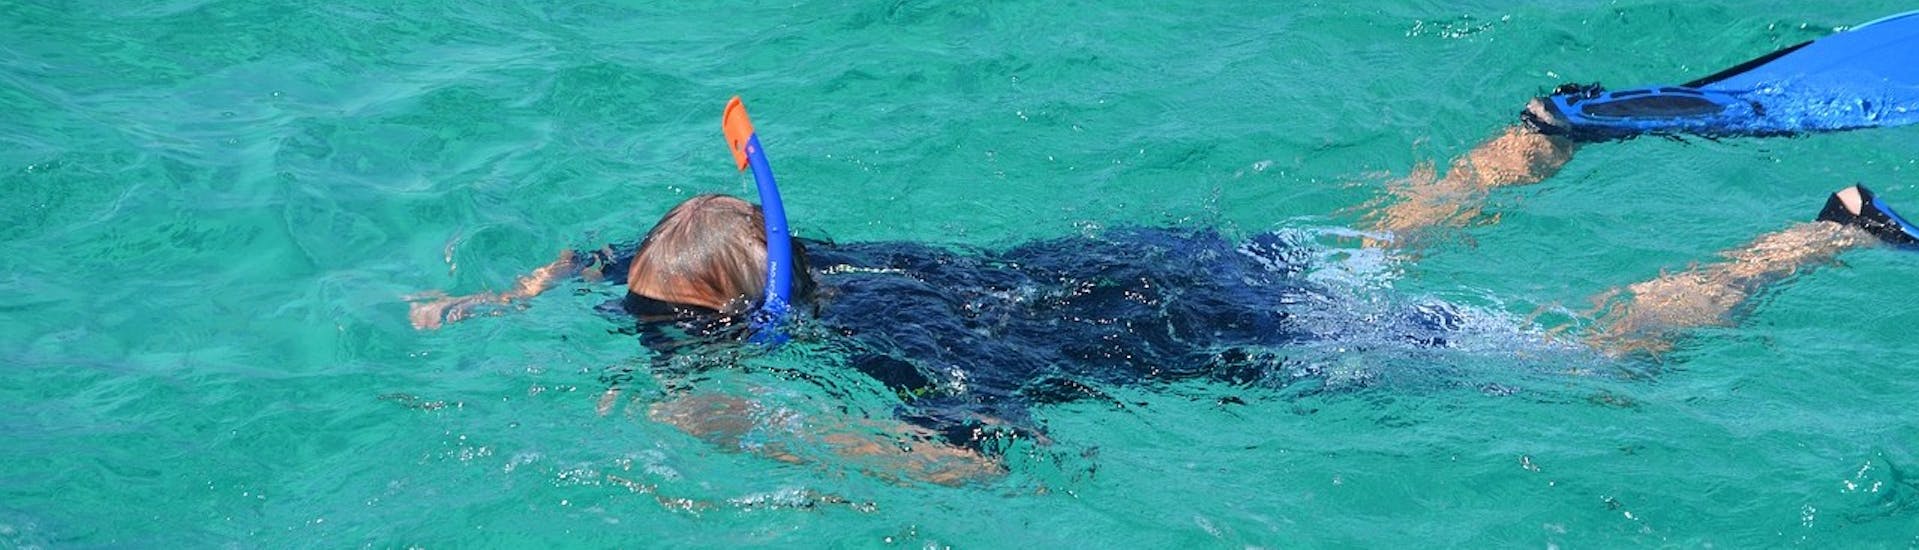 A child enjoys snorkeling during a boat trip from Giardini Naxos to Isola Bella with Enjoy Sicily.